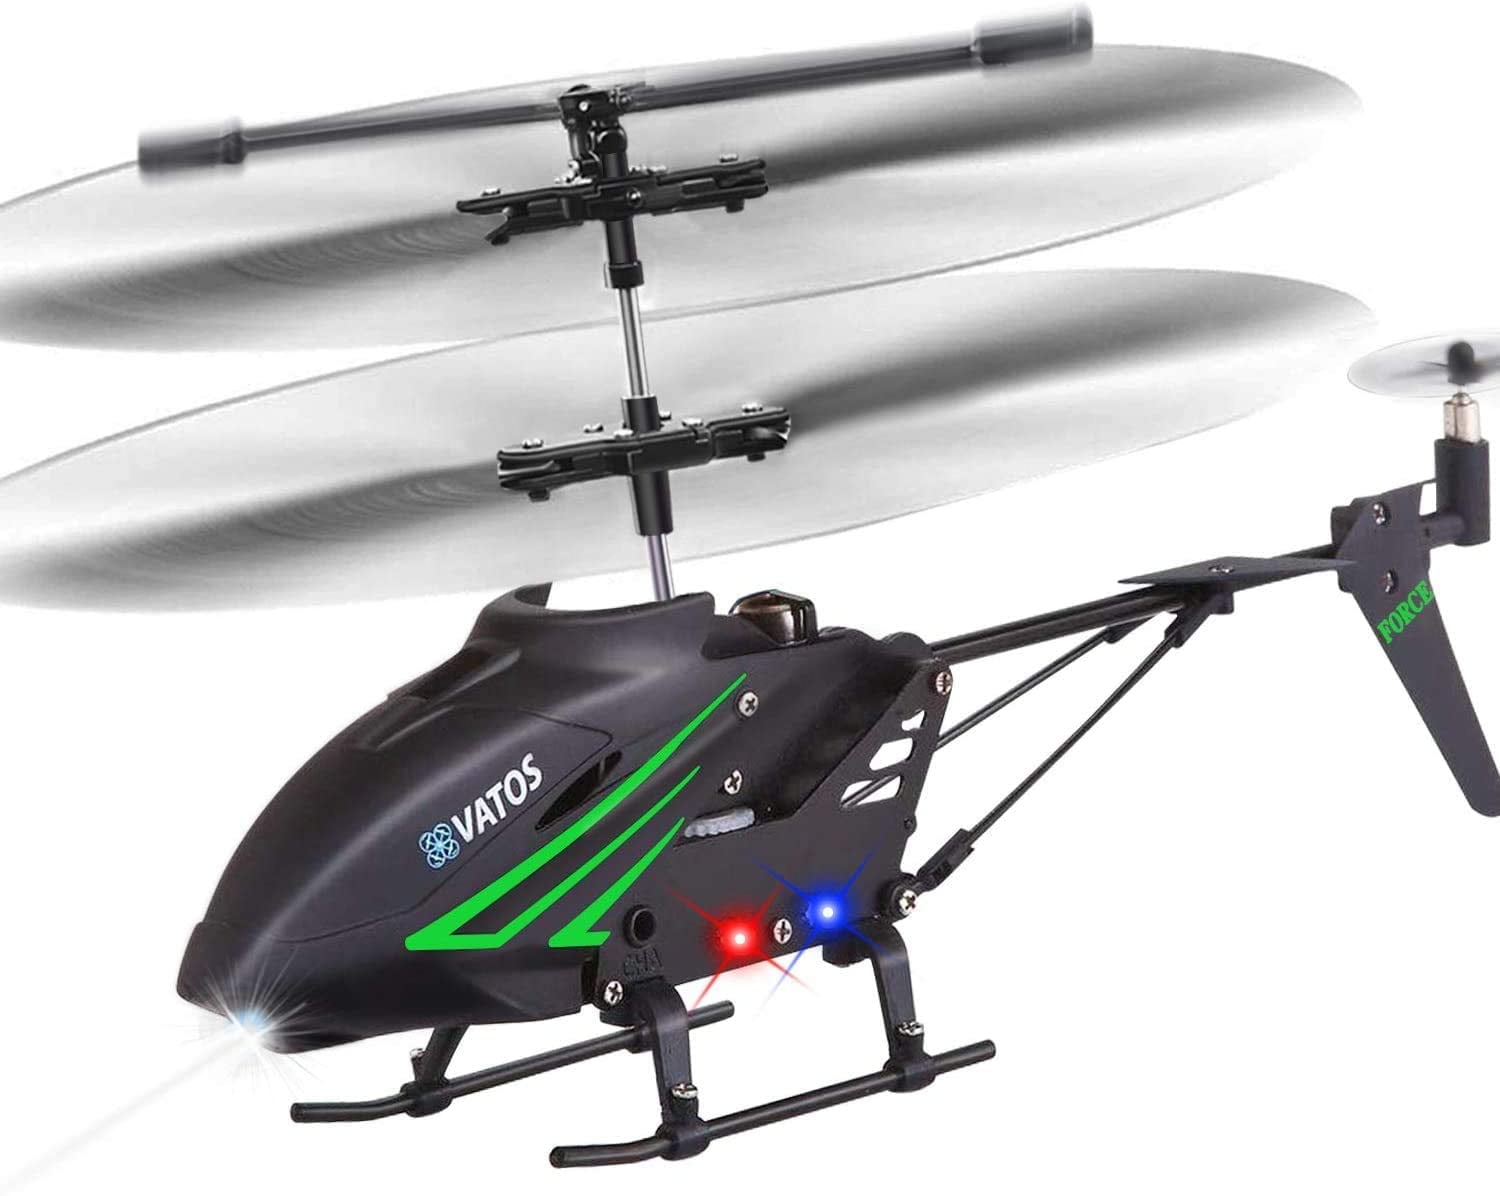 Gift for Boys Adults VATOS Remote Control Helicopter for Kids,RC Helicopter Altitude Hold Hobby,2.4GHz radio controlled Helicopter with Gyro & LED Light 3.5 Channel Indoor Toy,One-Key Take-Off 